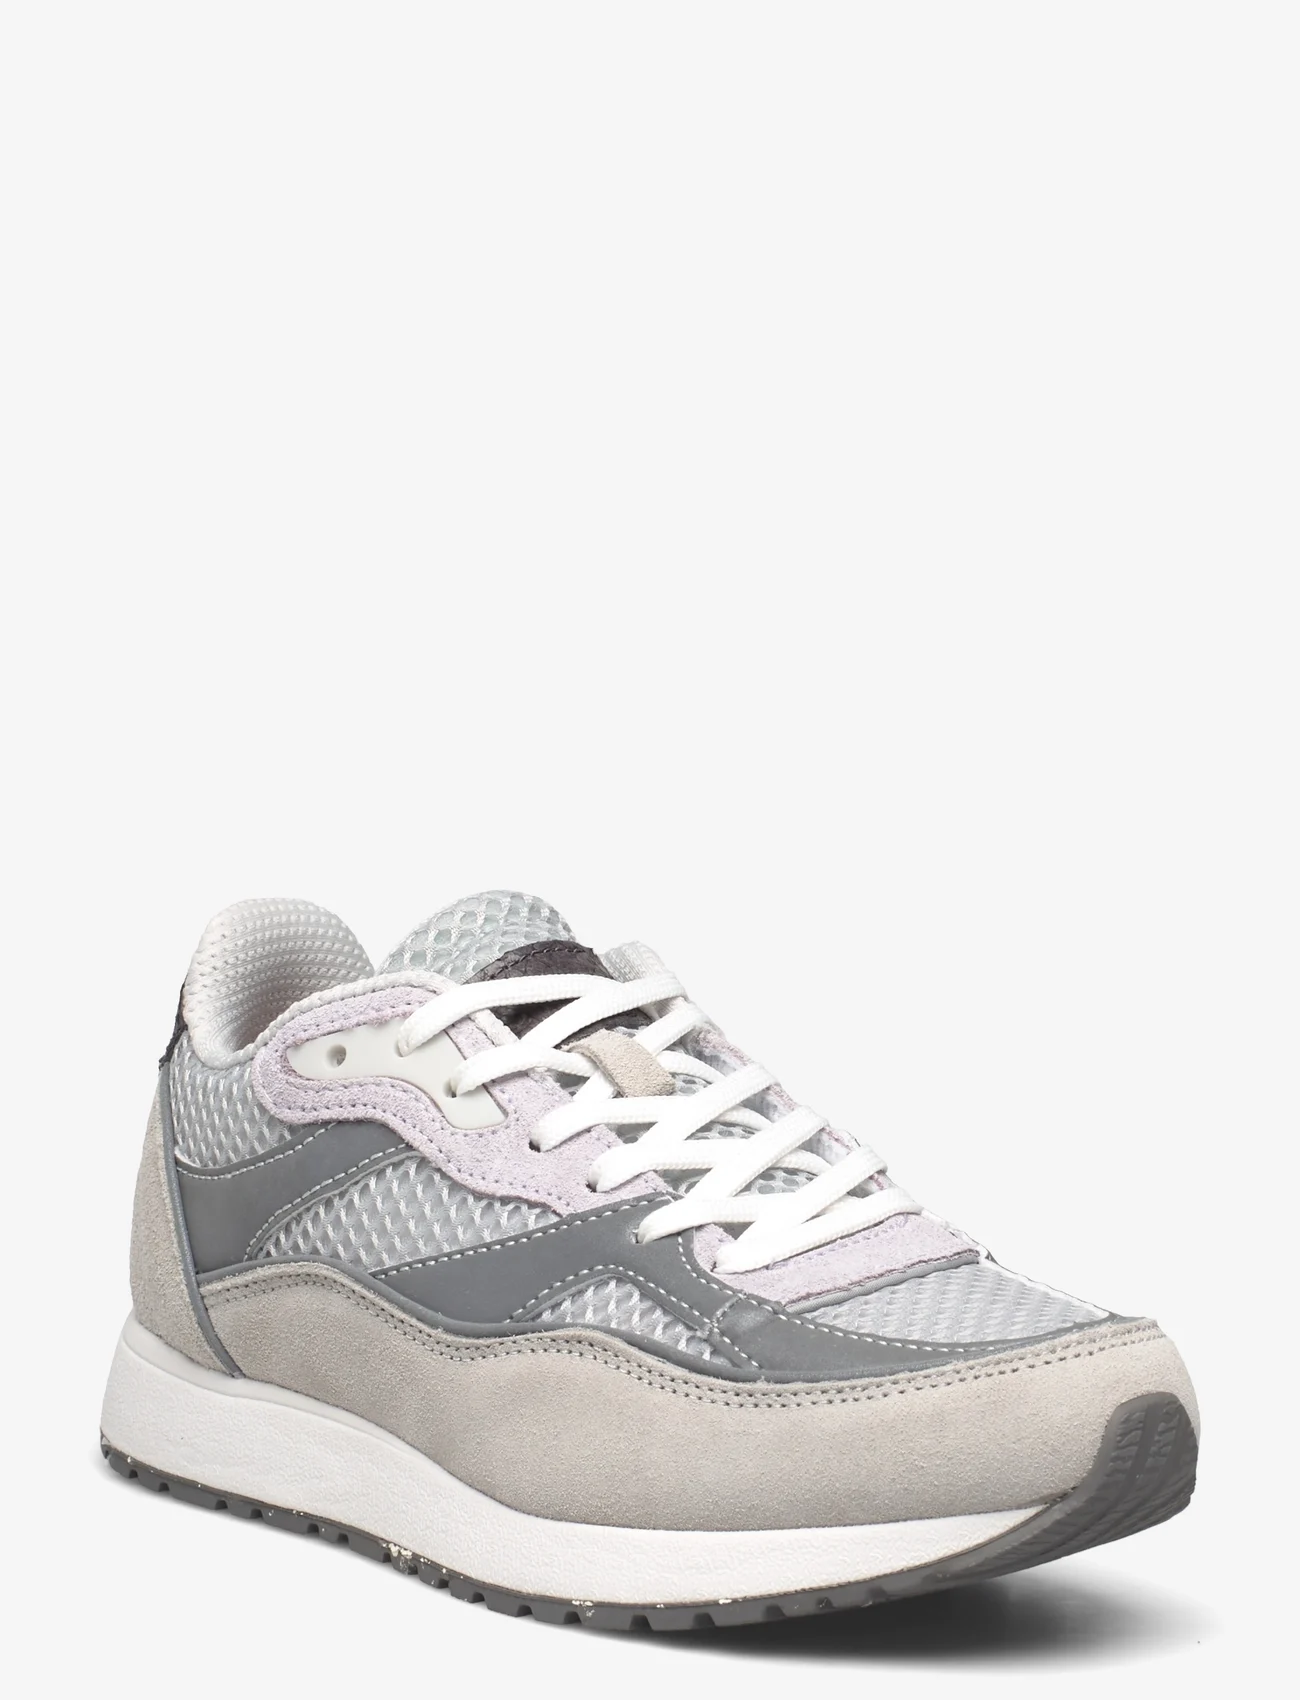 WODEN - Hailey - low top sneakers - oyster - 0